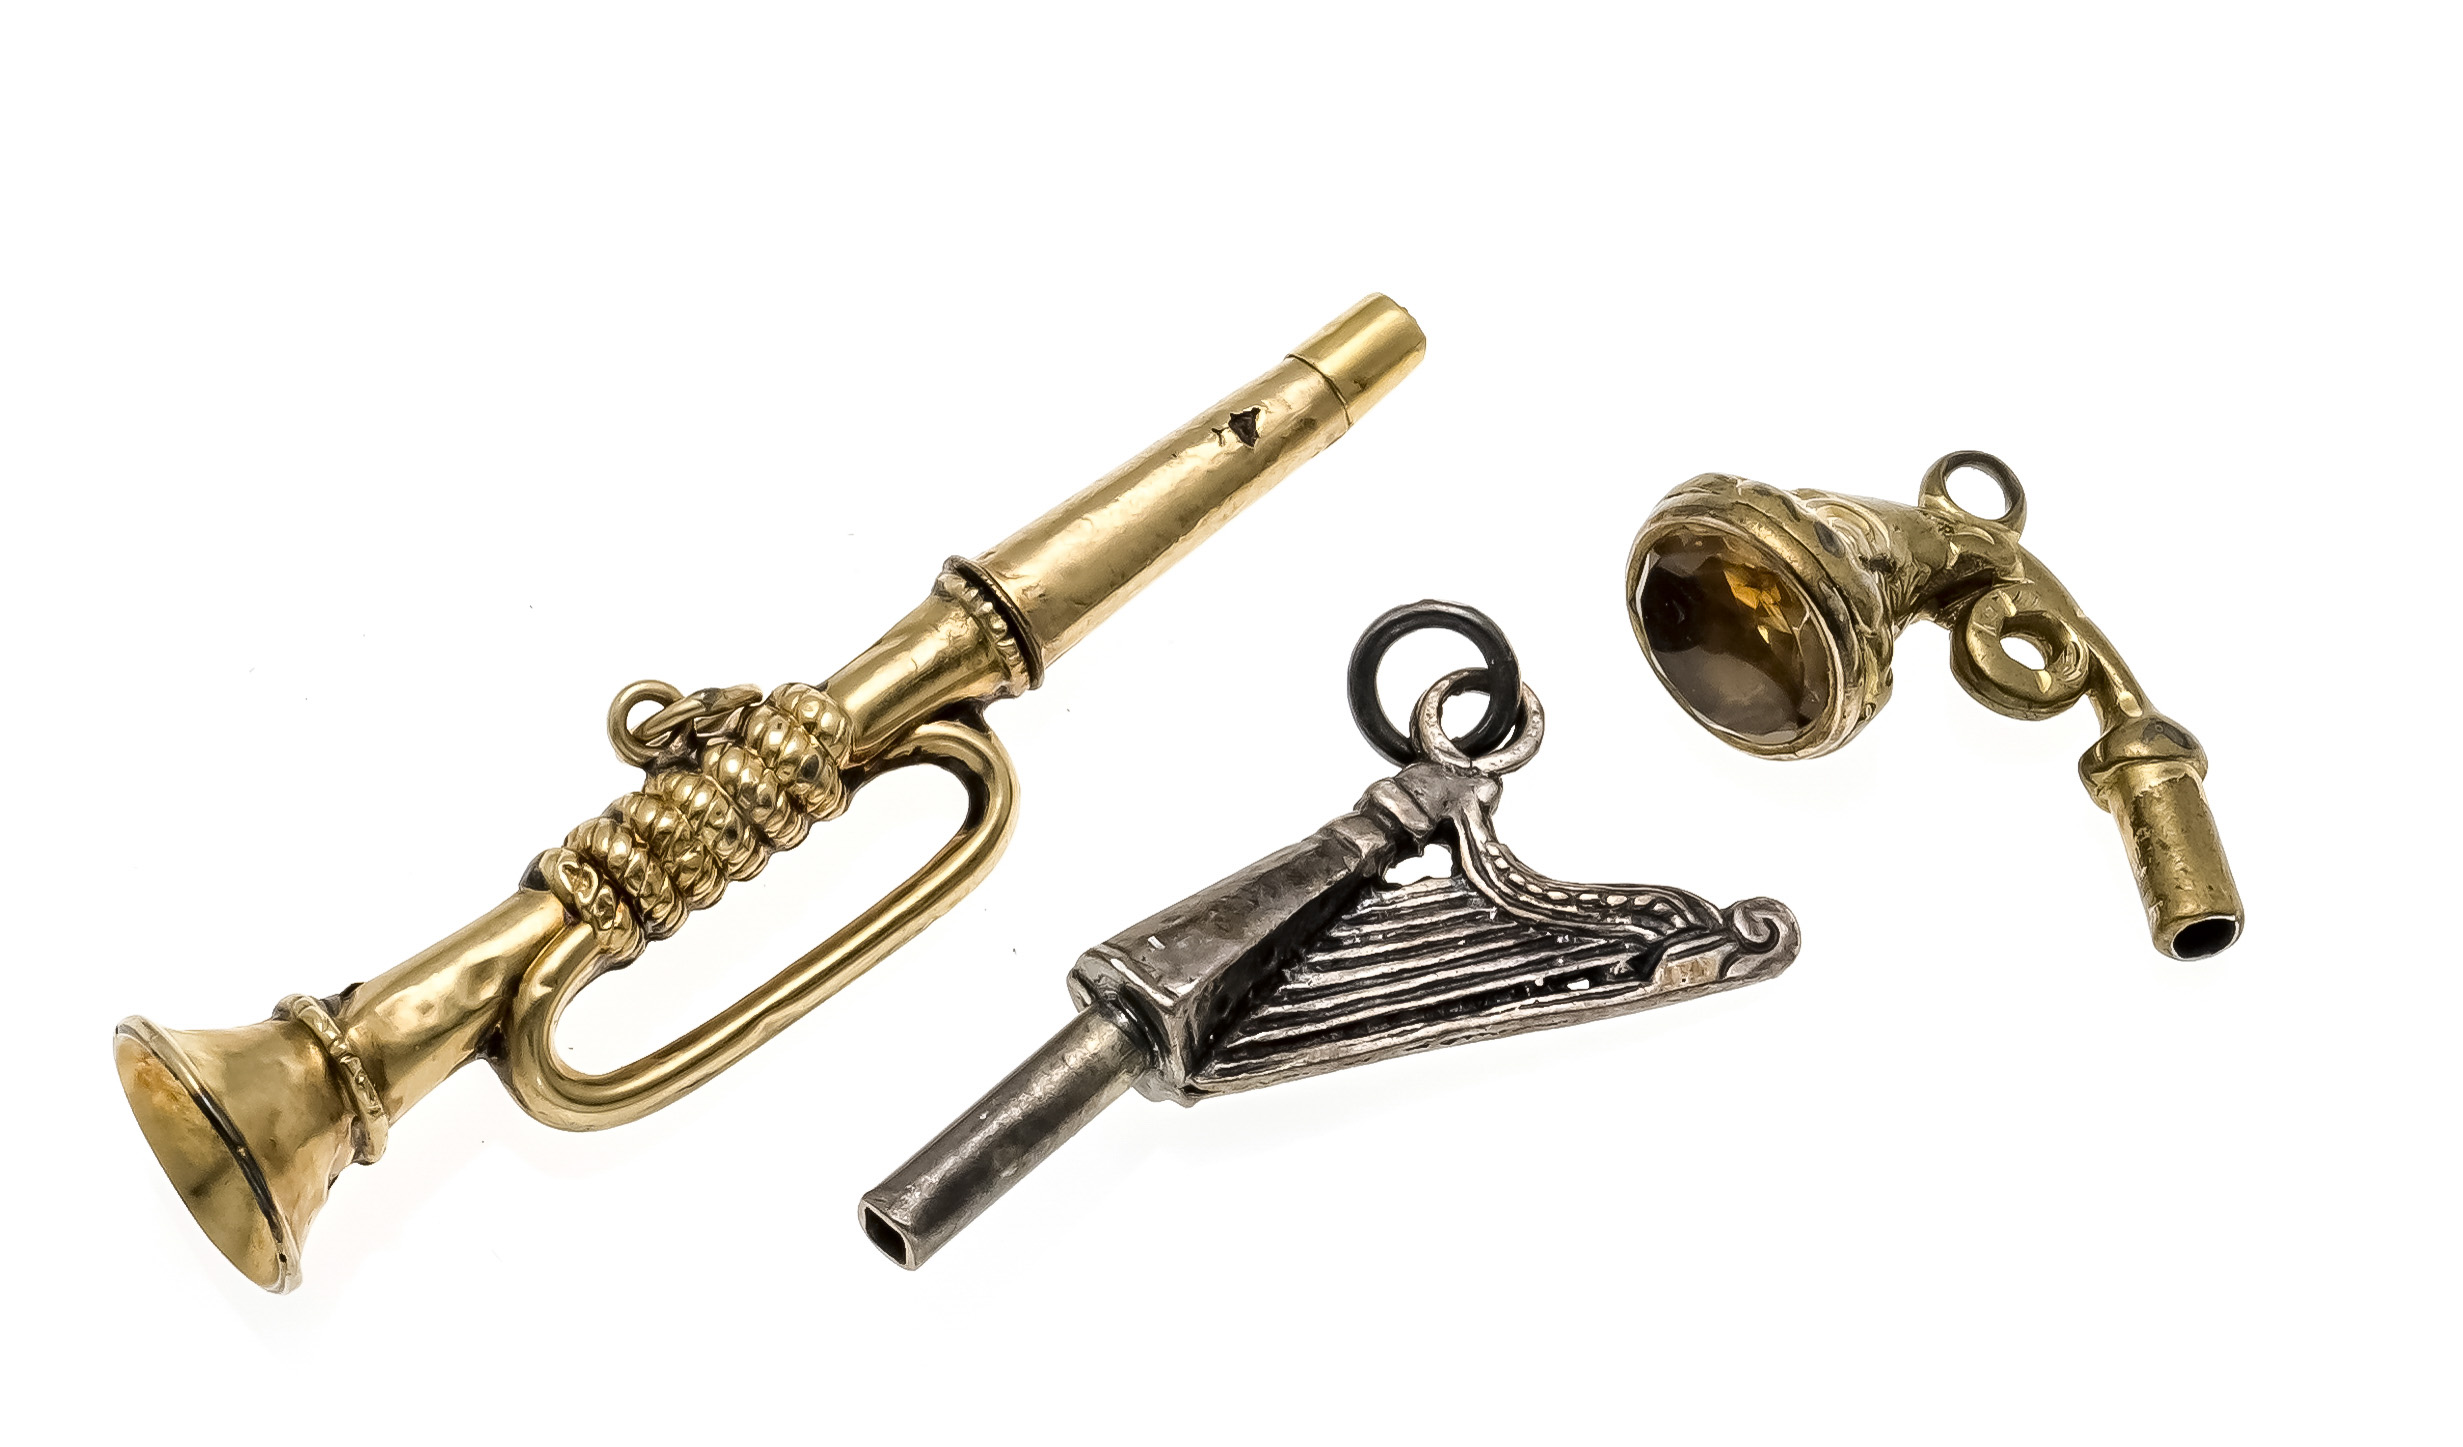 3 antique pocket watch keys, musical instruments, 19th century, various materials such as silver,